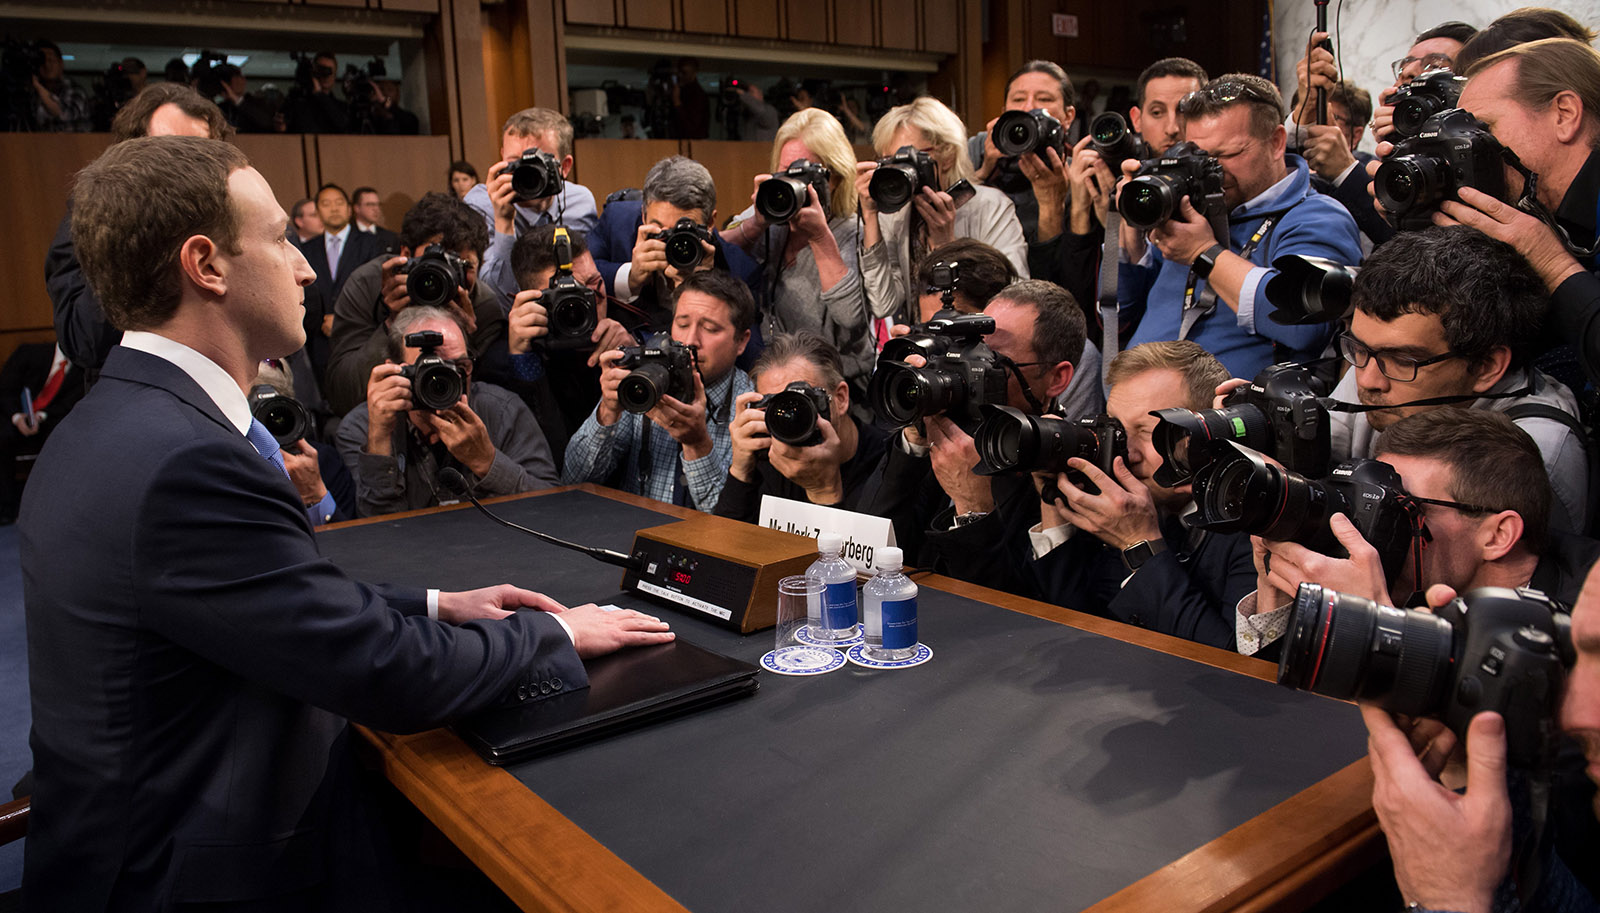 Facebook’s Mark Zuckerberg appearing before a Senate hearing on Capitol Hill in Washington, D.C., April 10, 2018